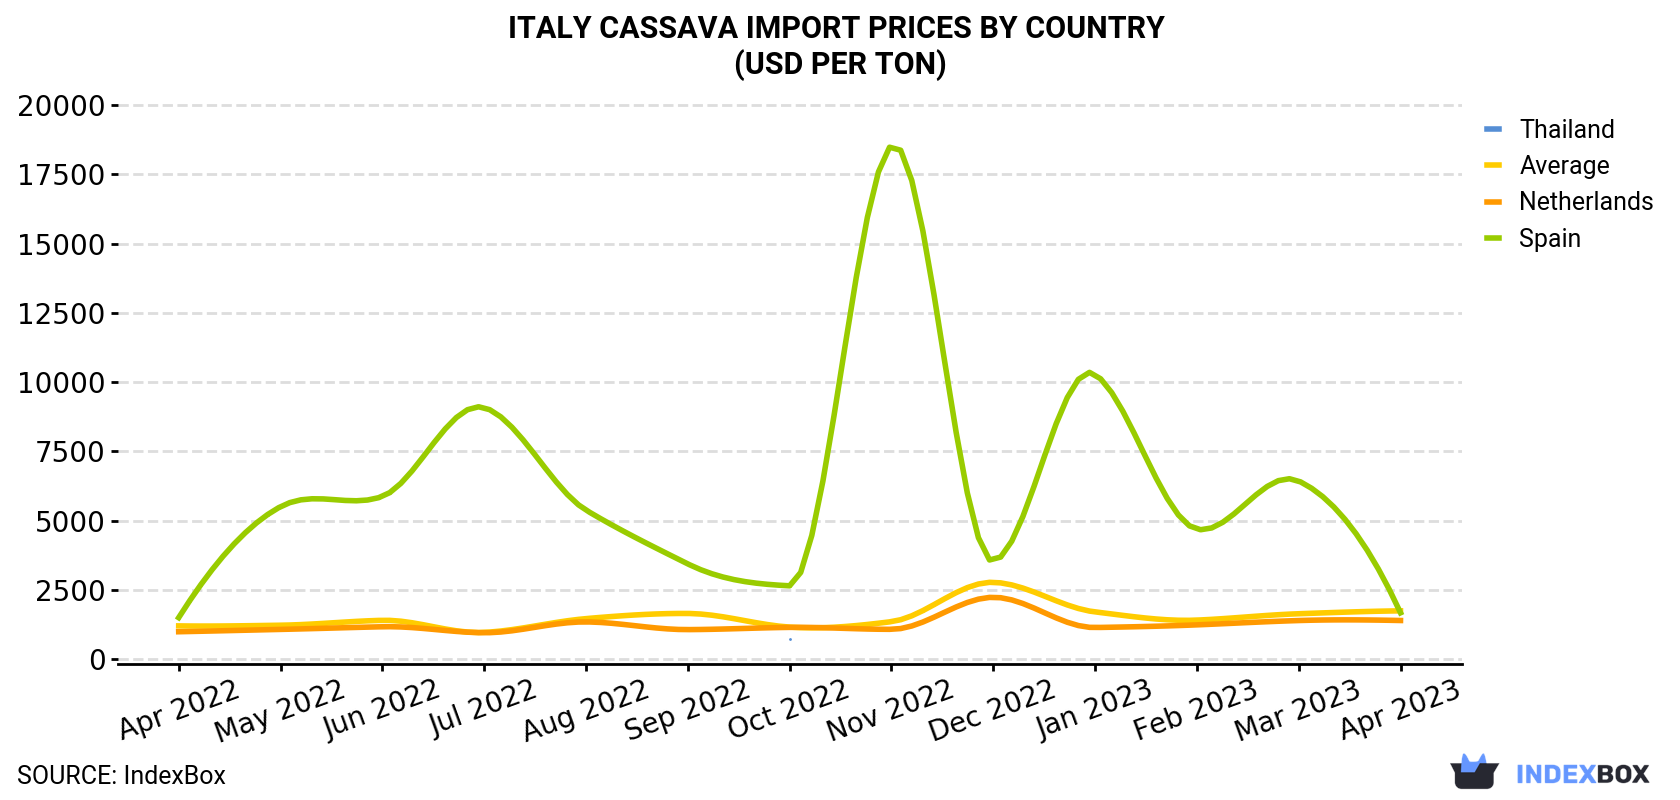 Italy Cassava Import Prices By Country (USD Per Ton)